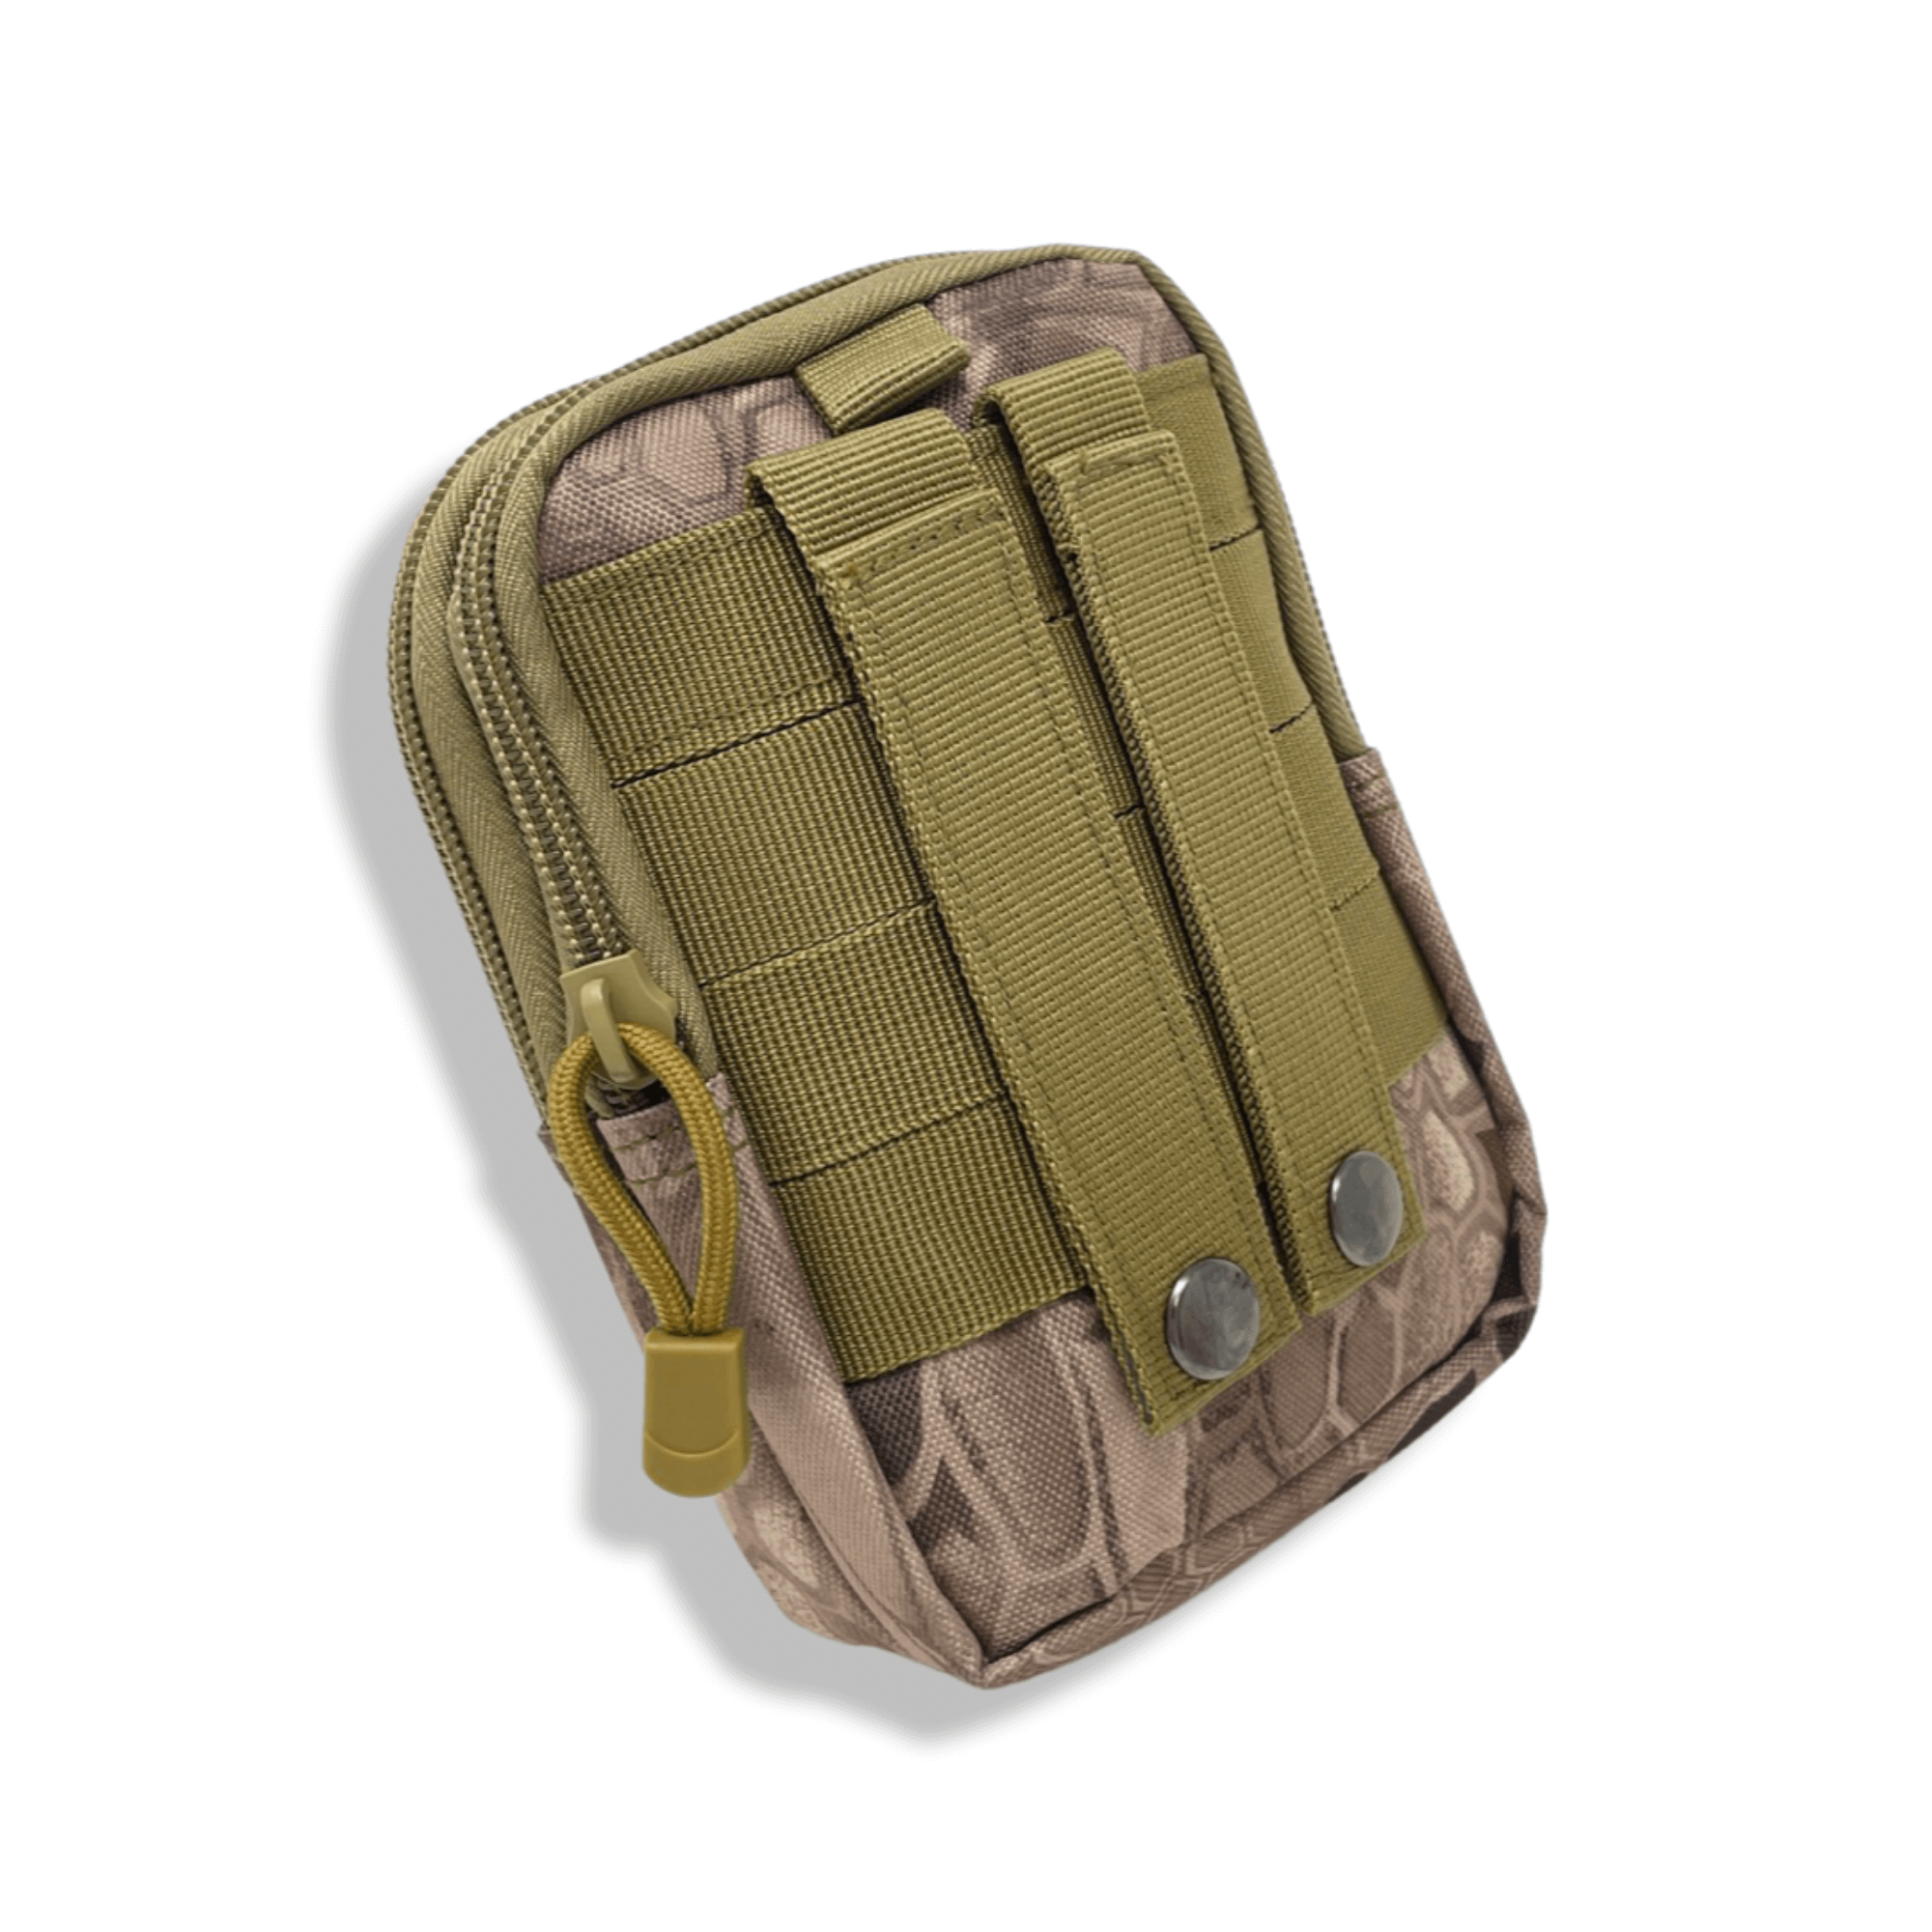 Tactical MOLLE Pouch & Waist Bag for Hiking & Outdoor Activities-34